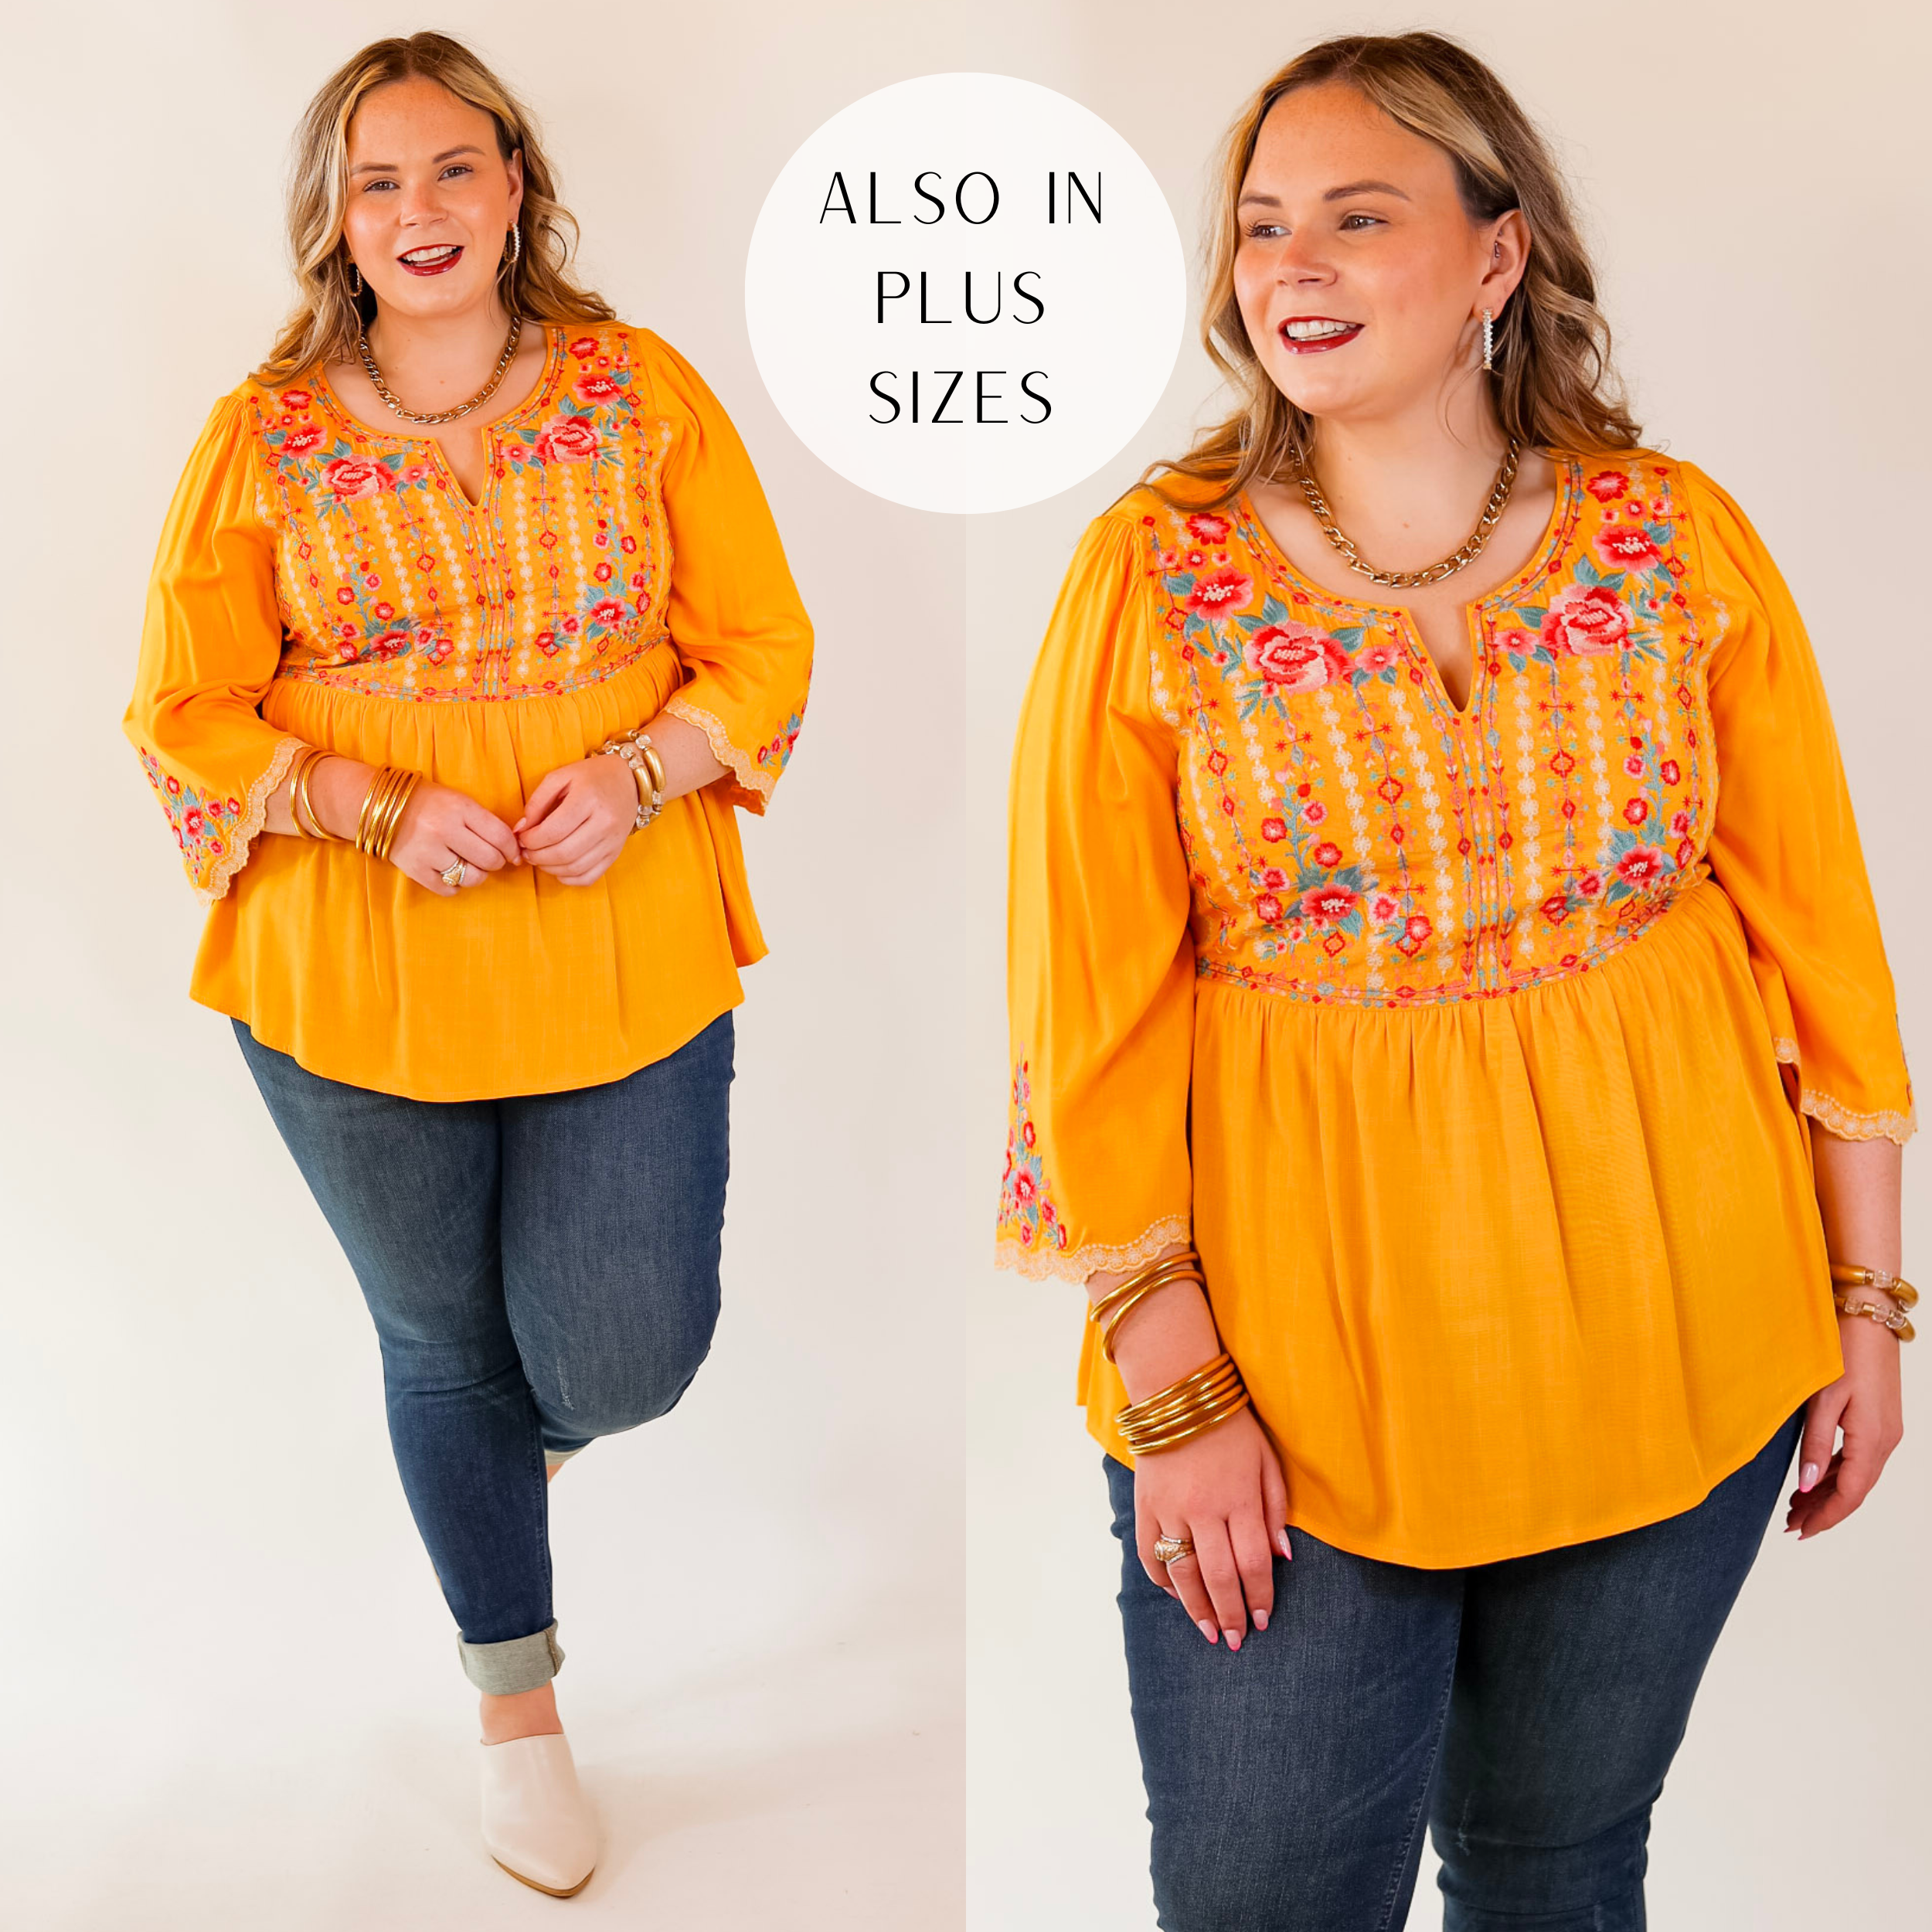 Already Mine 3/4 Bell Sleeve Embroidered Babydoll Top in Yellow